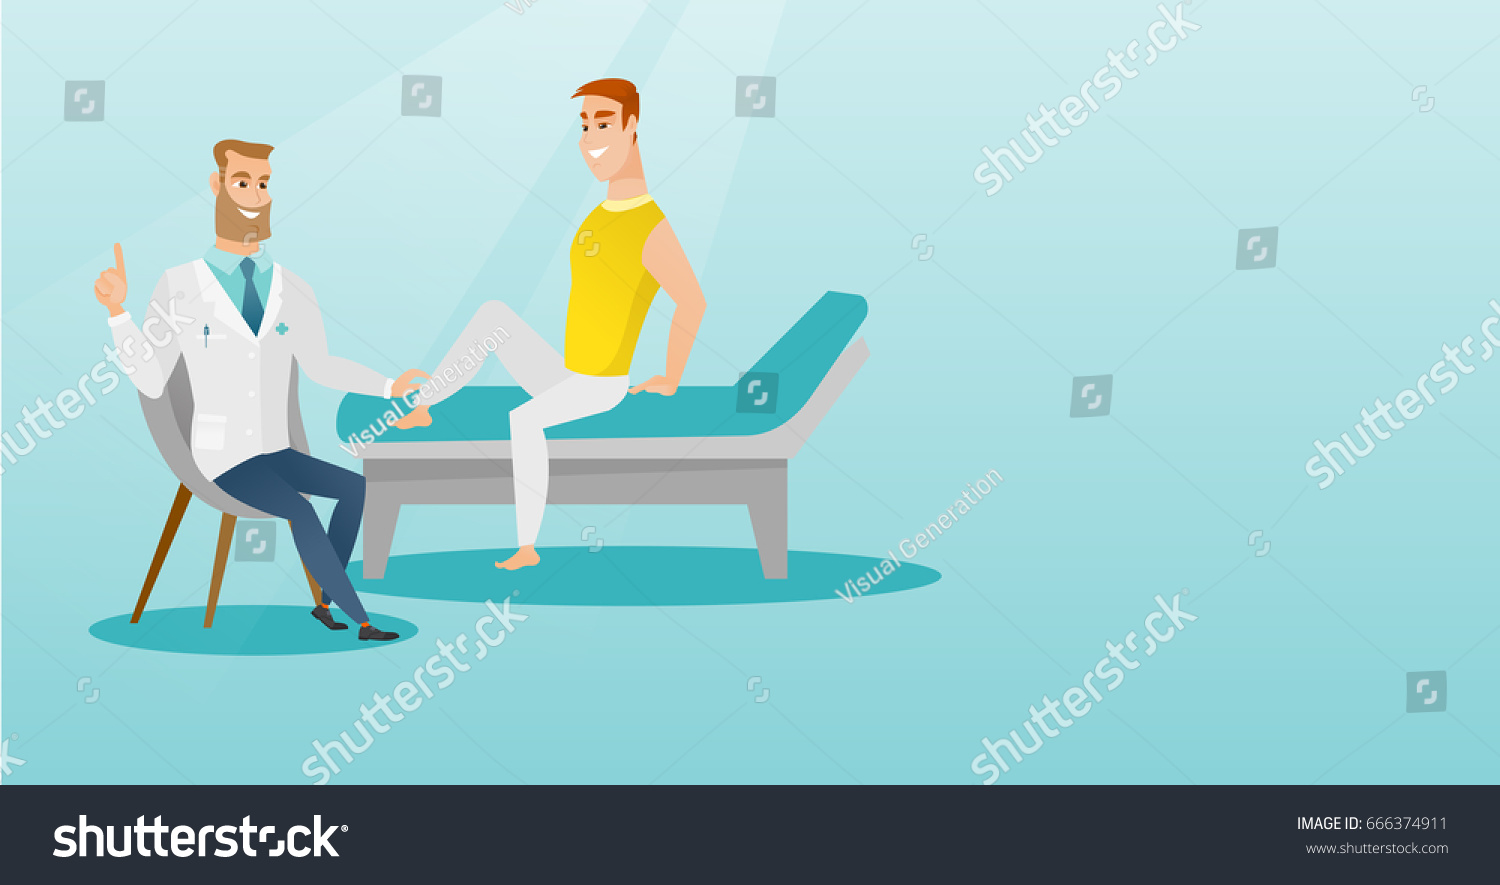 Caucasian Gym Doctor Checking Ankle Patient Stock Vector Royalty Free 666374911 Shutterstock 